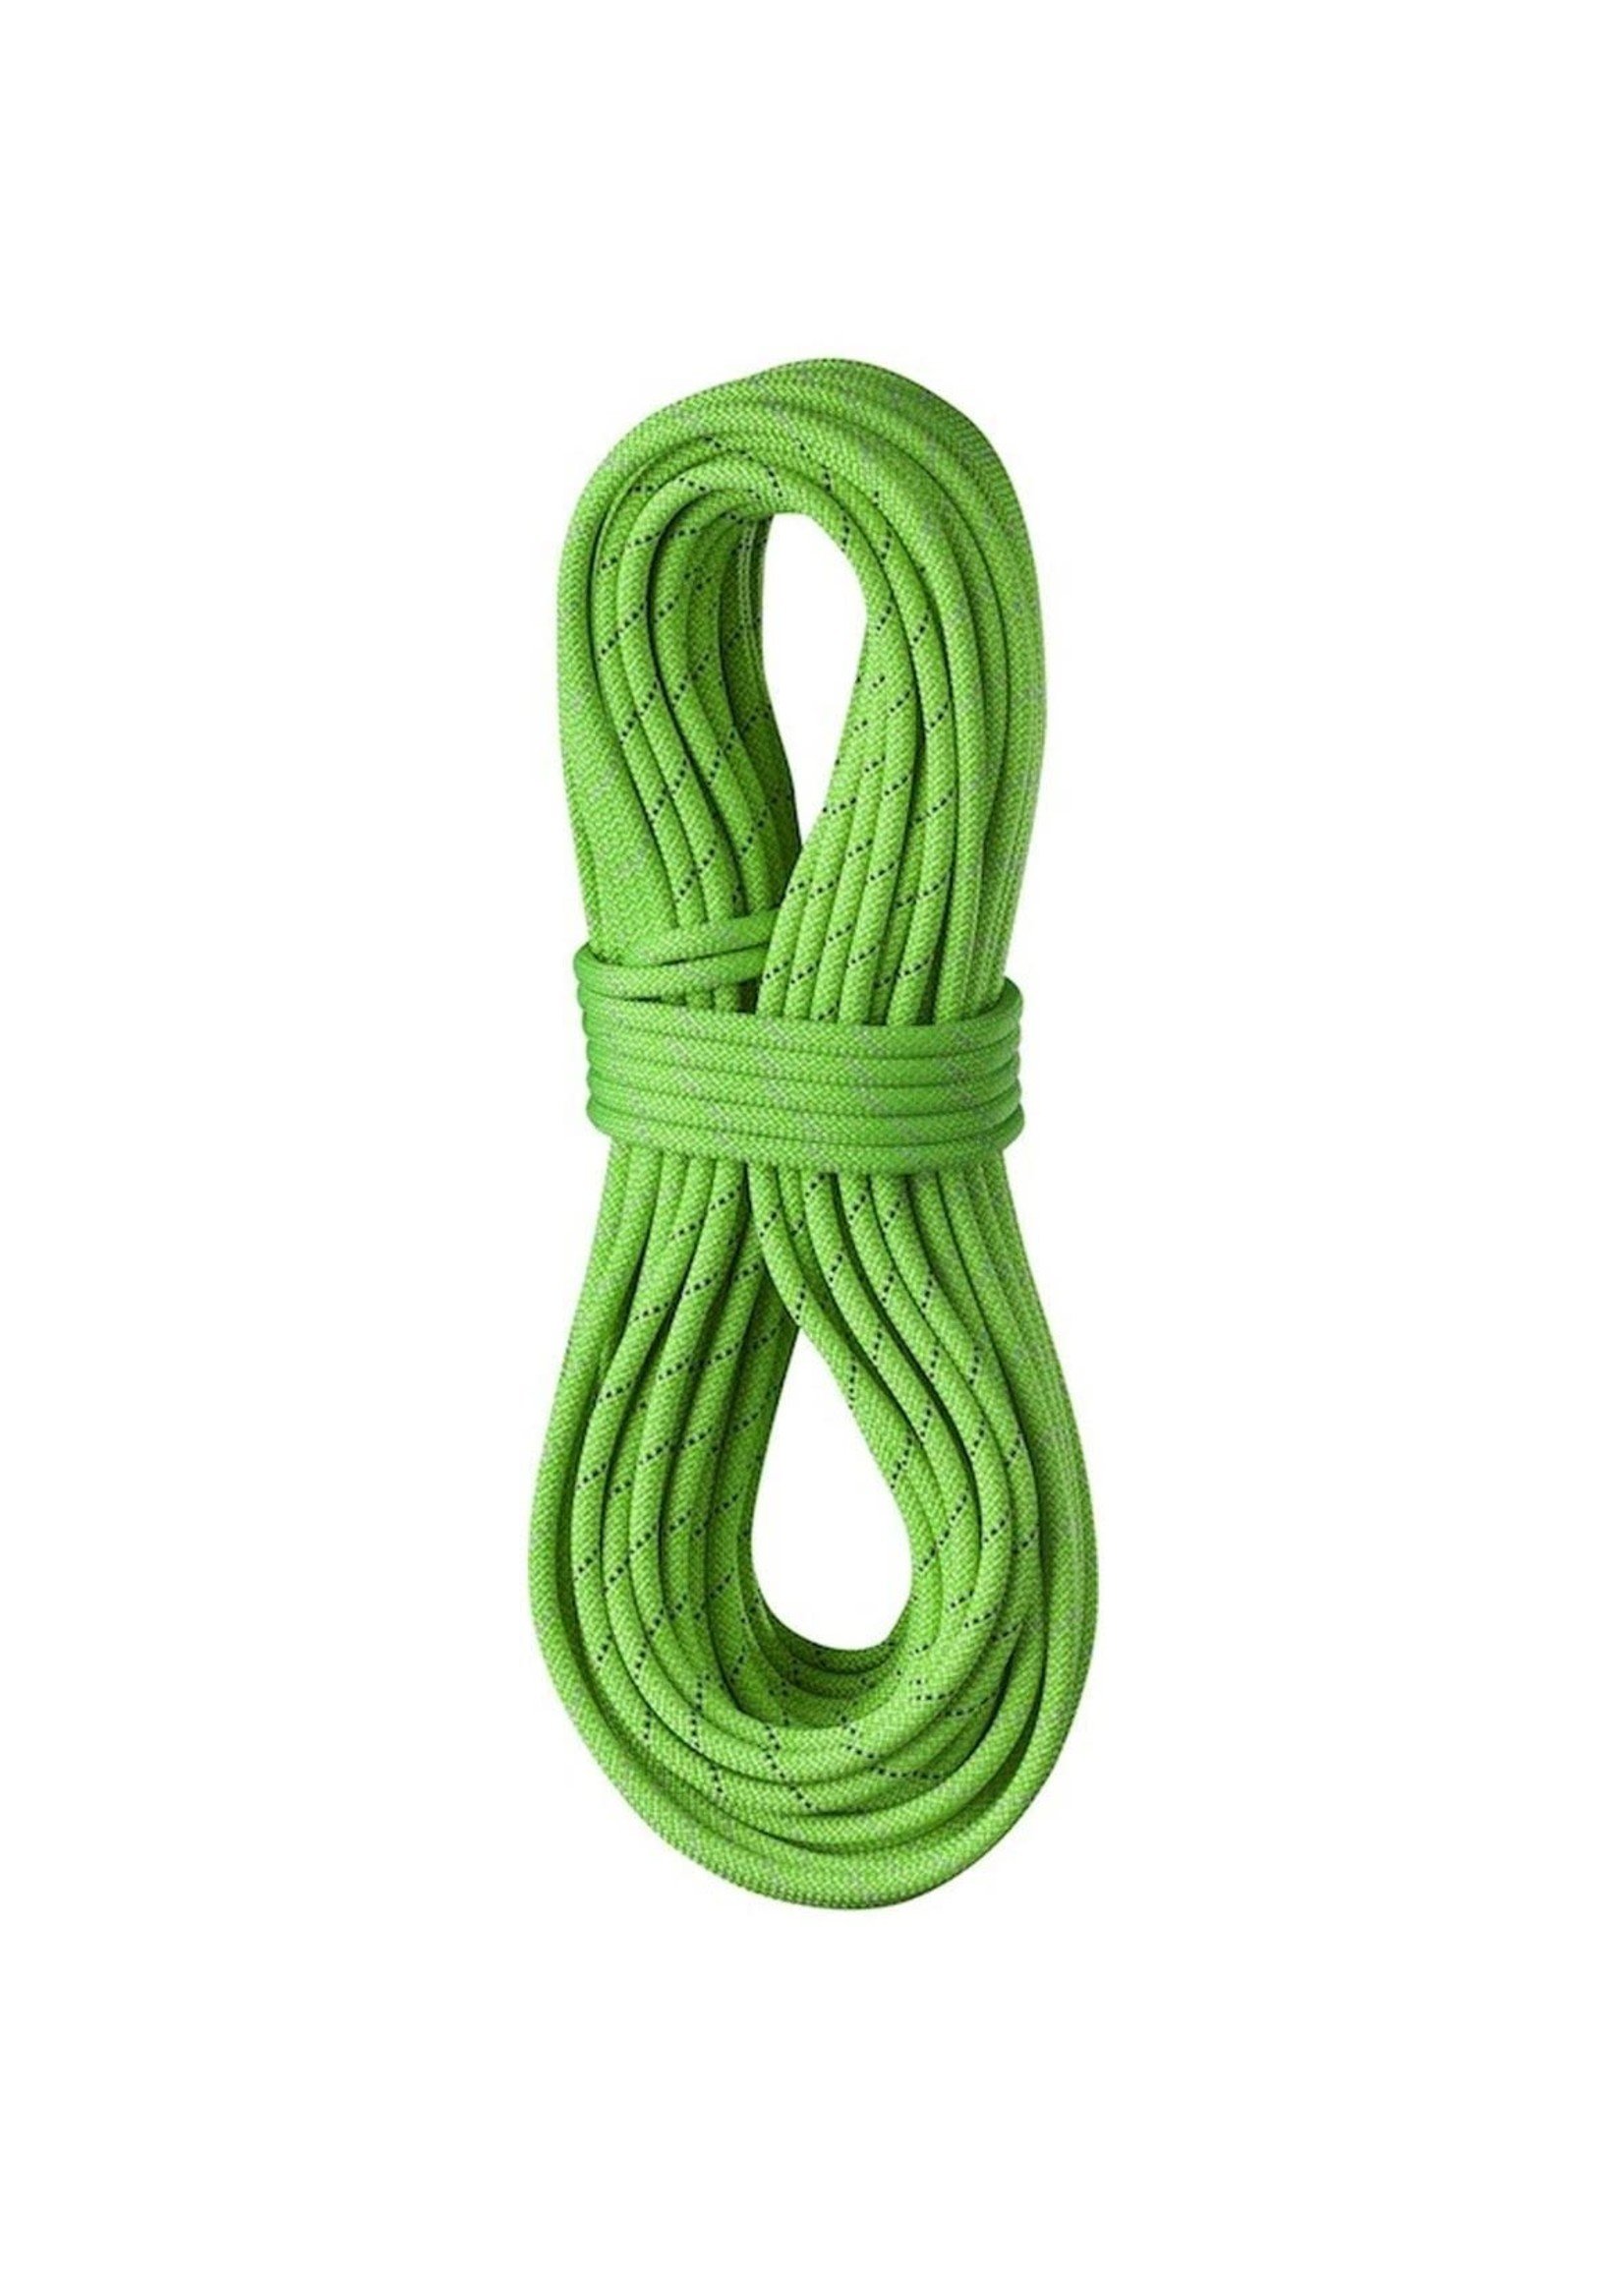 Edelrid Tommy Caldwell Pro Dry DT Rope 9.6 mm | Vertical Addiction